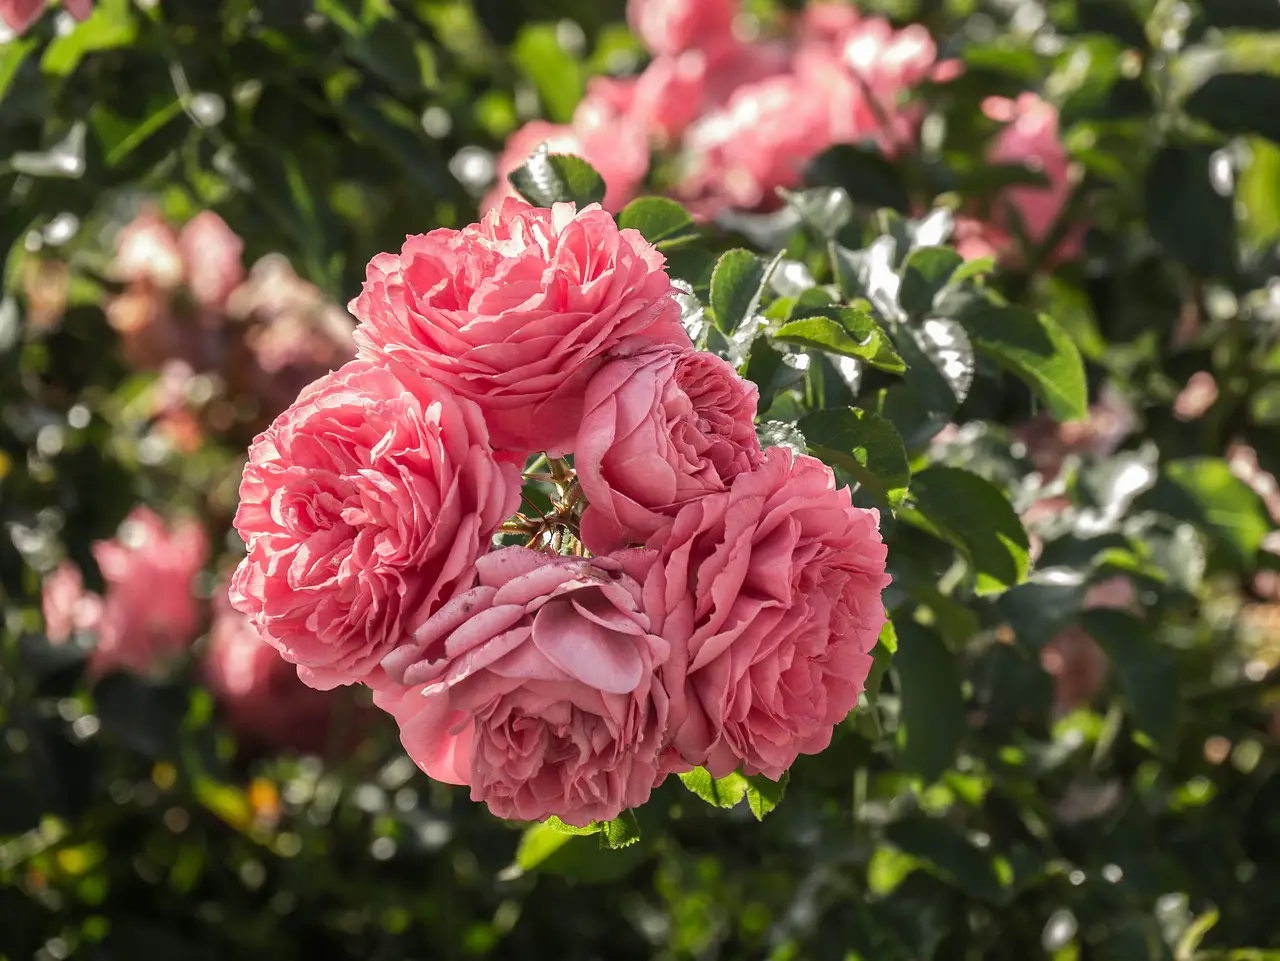 Problems and Diseases Encountered When Growing Roses